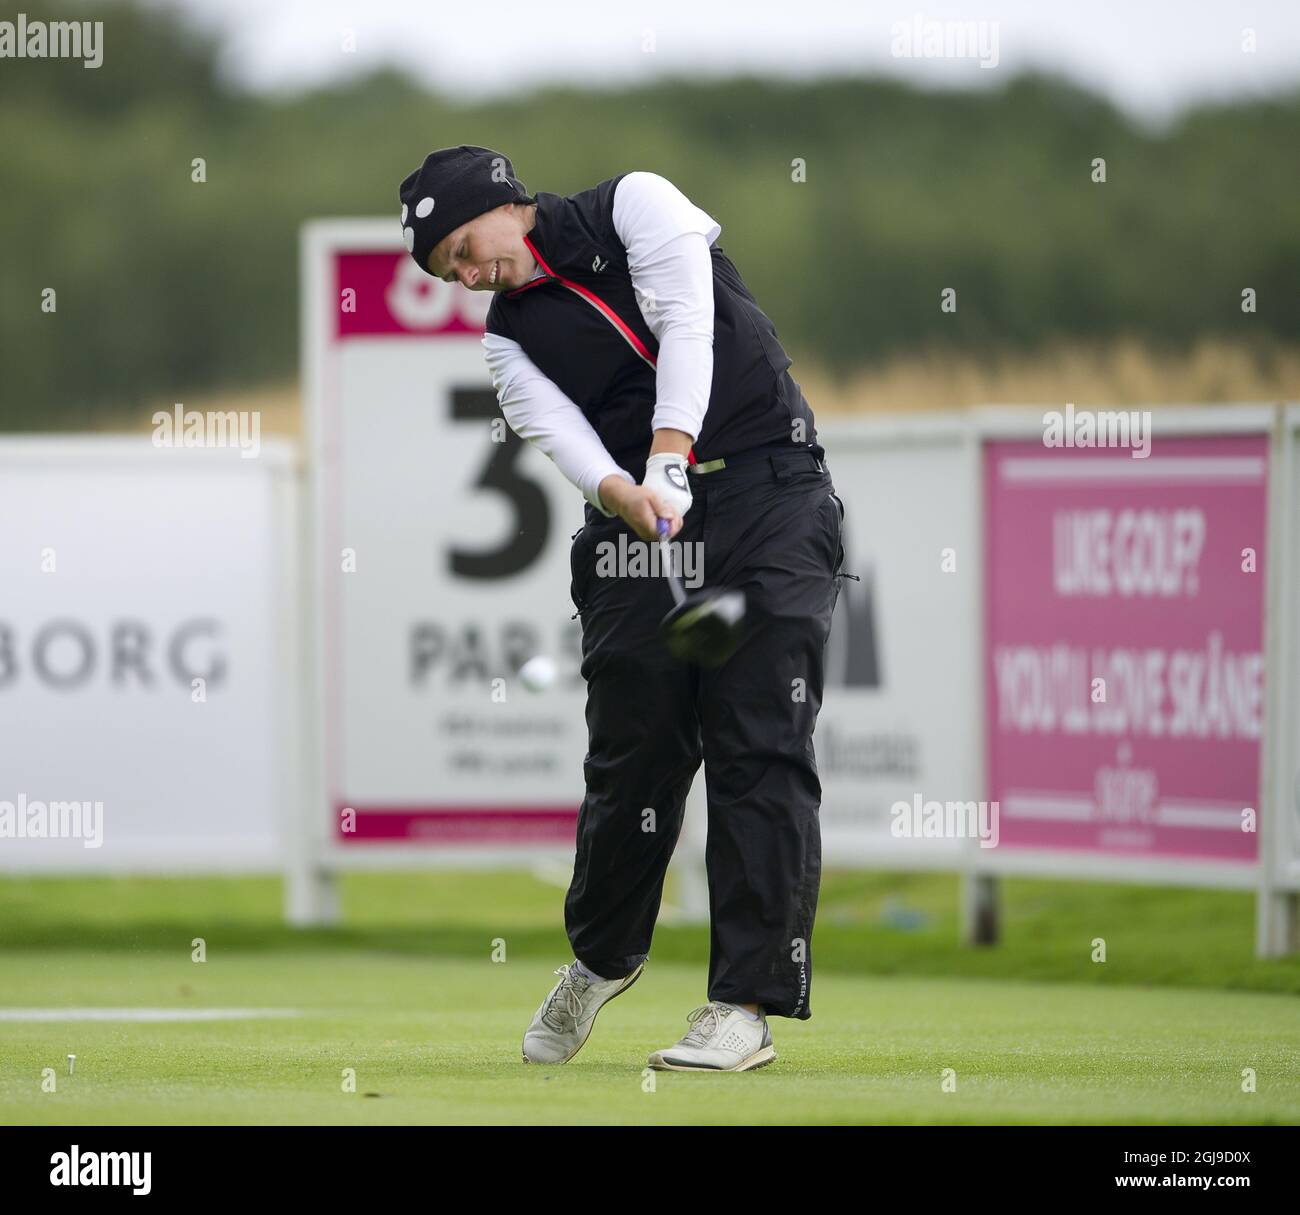 Malene Jorgensen of Denmark tees of from during the third round of the  Helsingborgs Open in the Ladies European Tour at Vasatorps Golf Club in  Helsingborg, Sweden, Sept. 05, 2015. Photo Bjorn